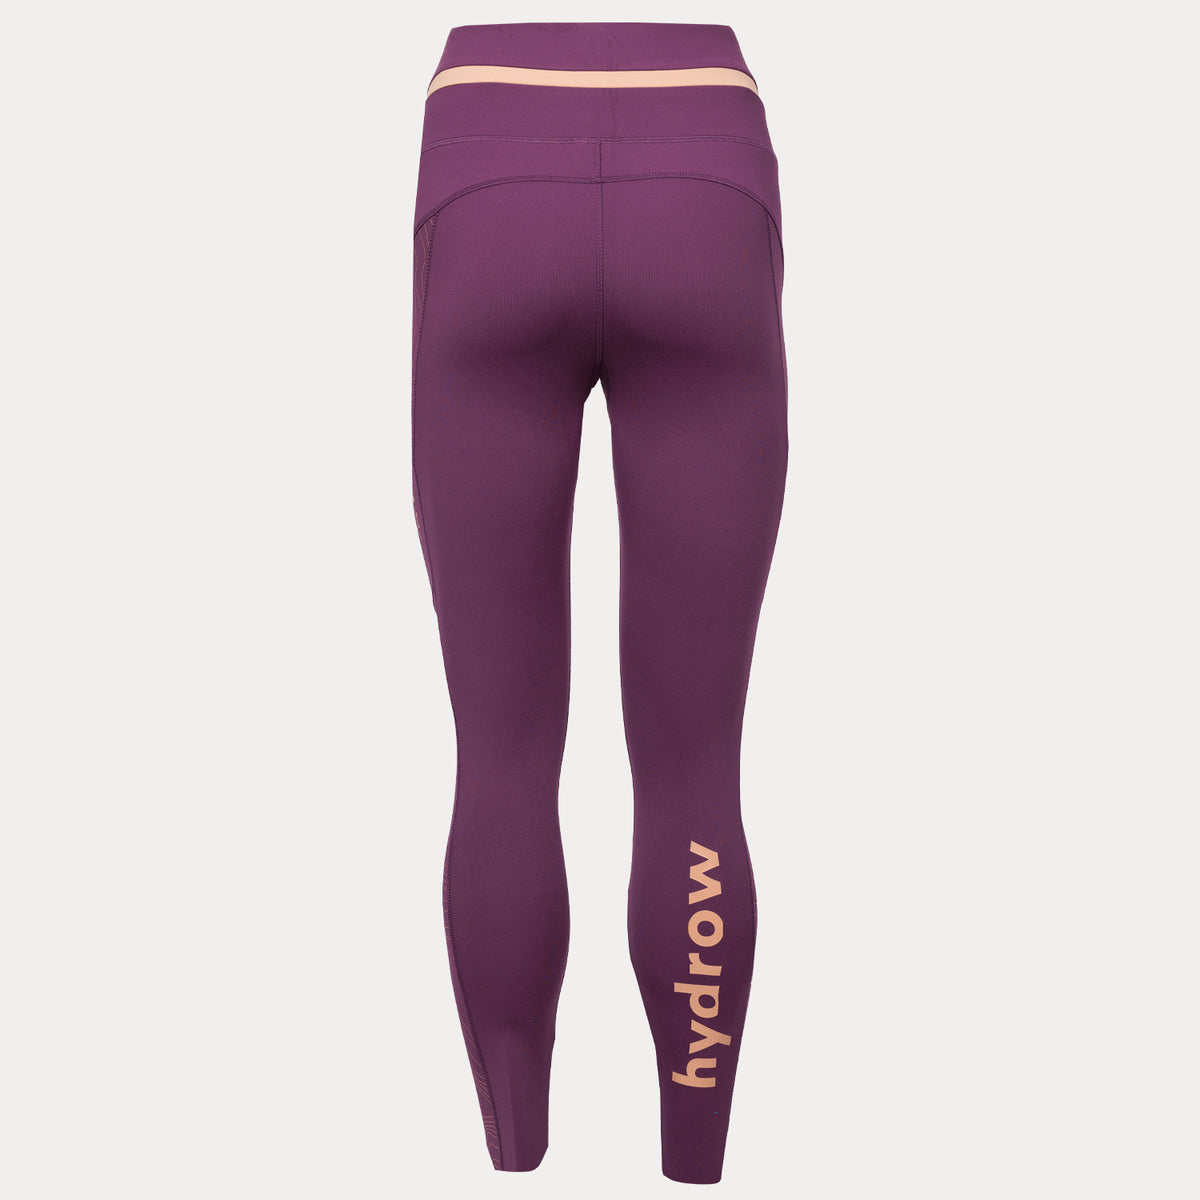 back view of plum leggings with hydrow logo on right  rear calf